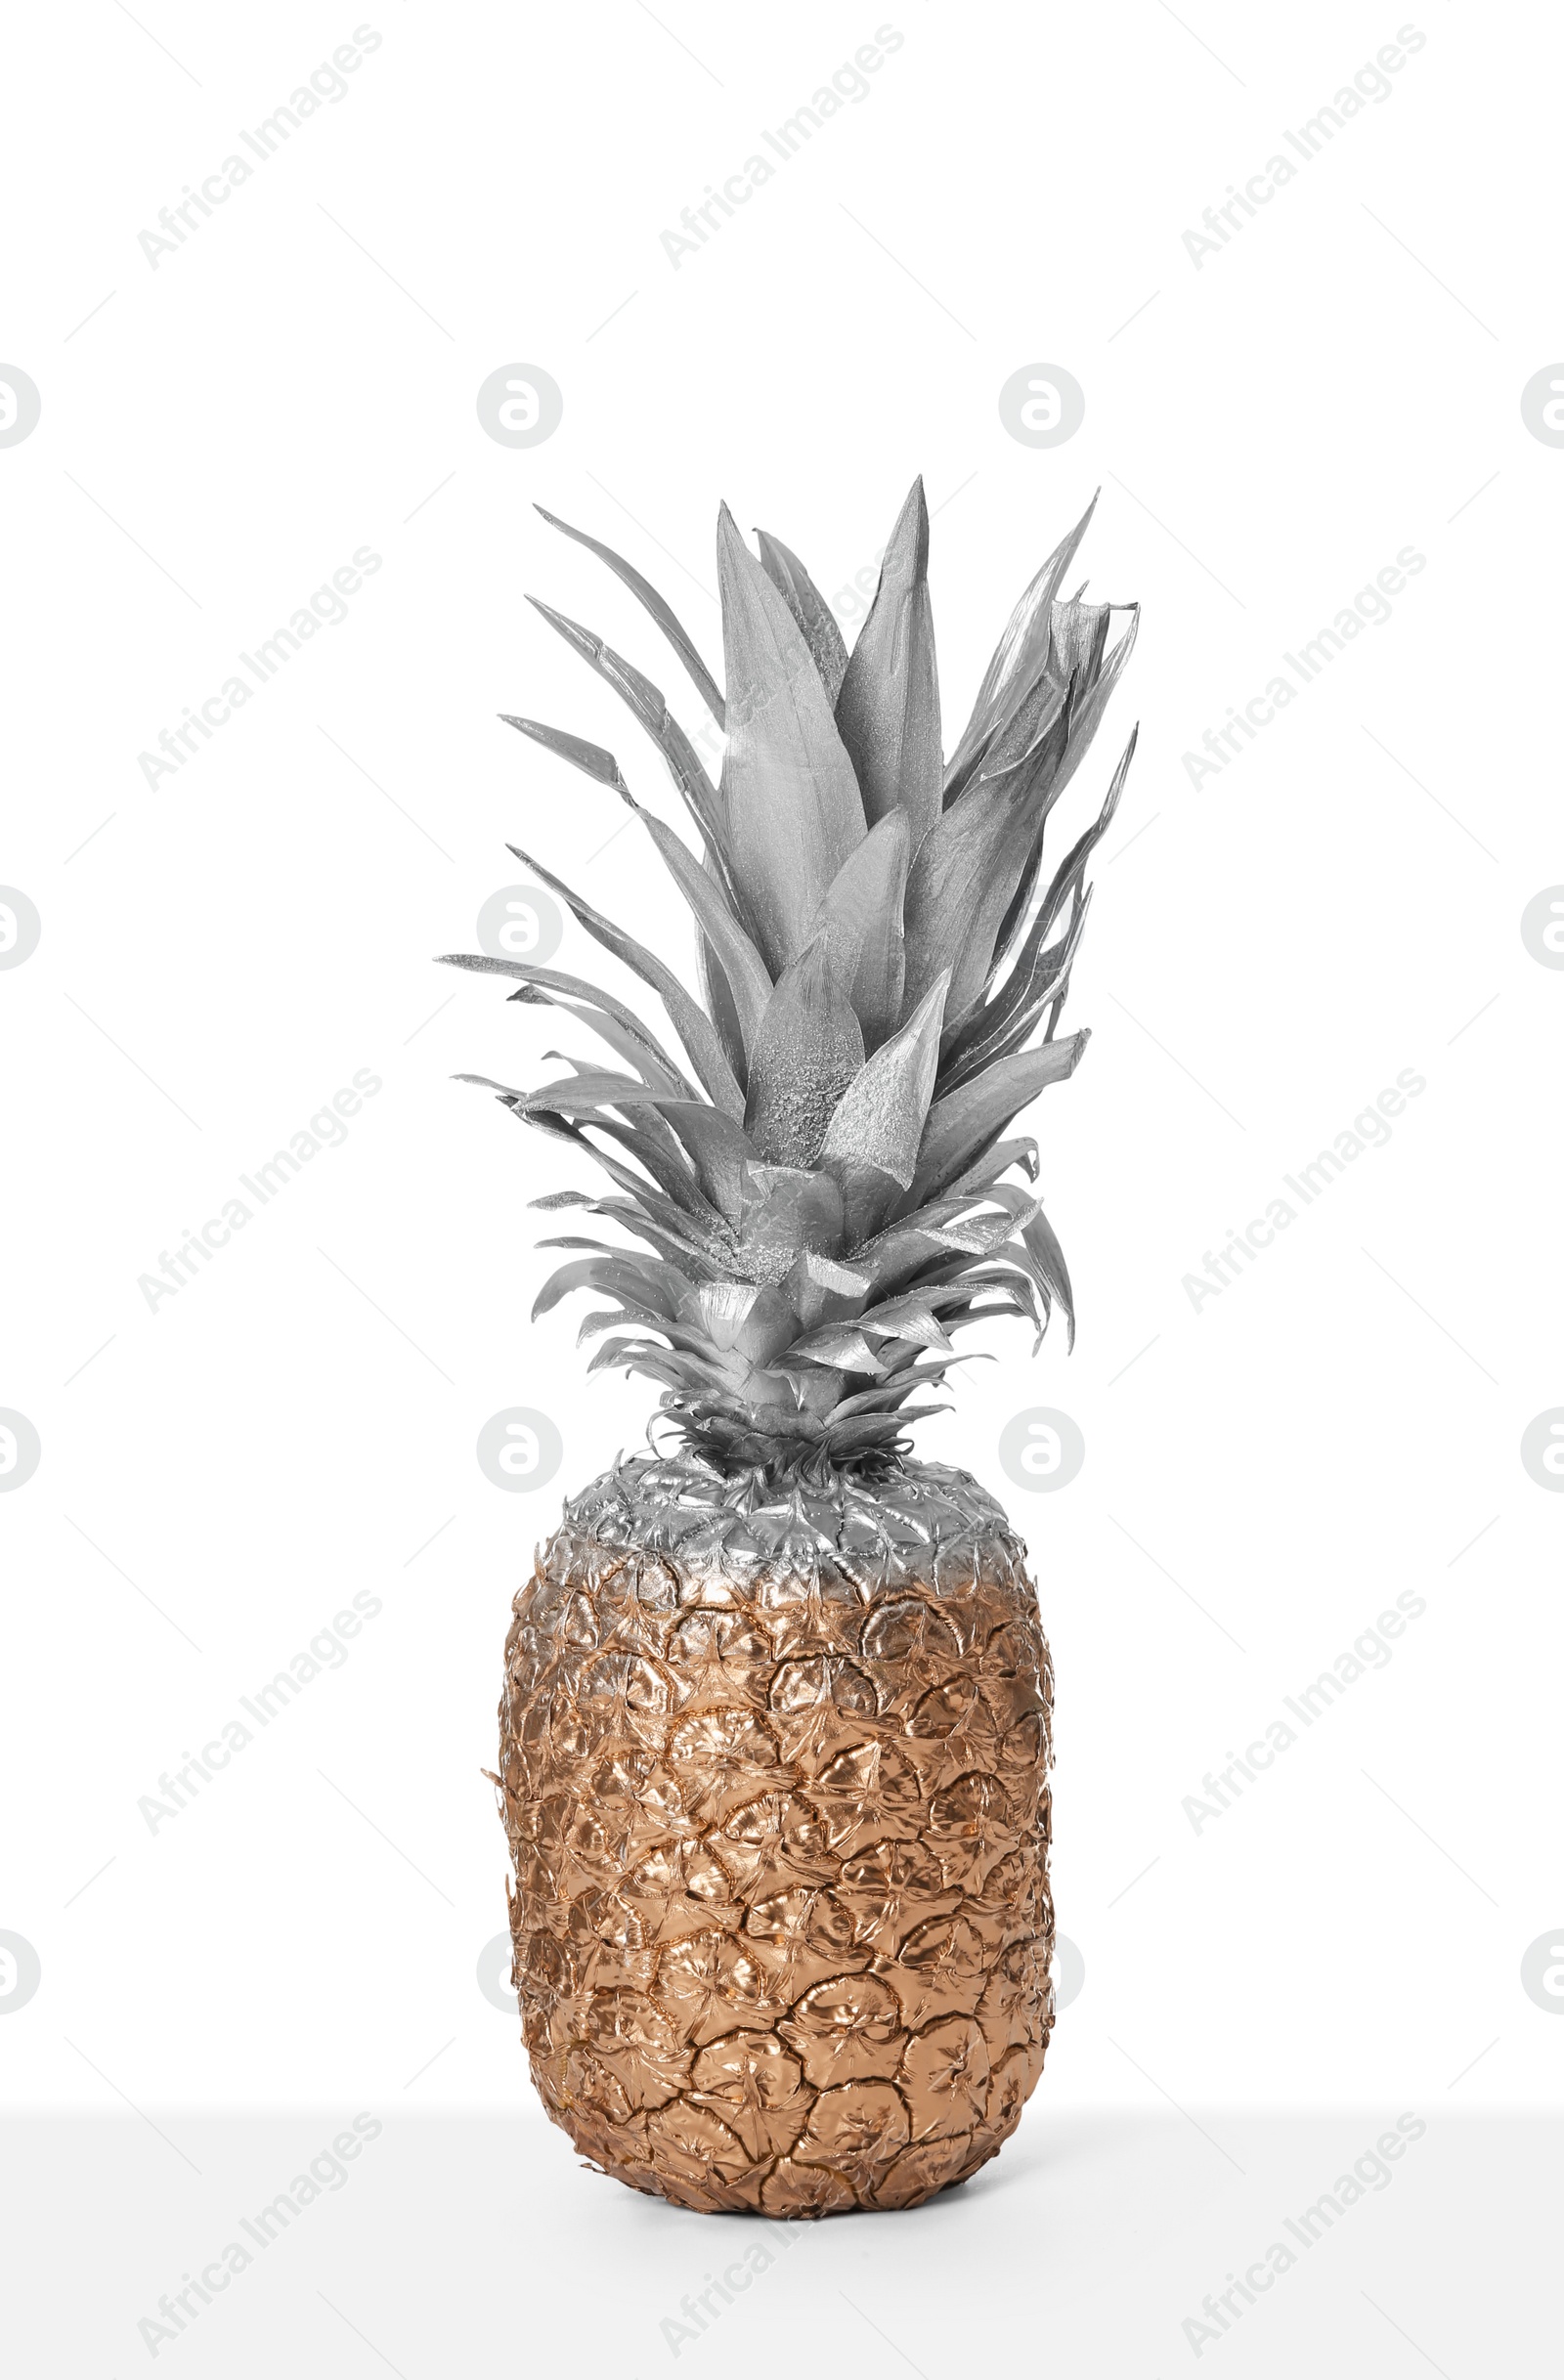 Photo of Pineapple painted with silver and gold on white background